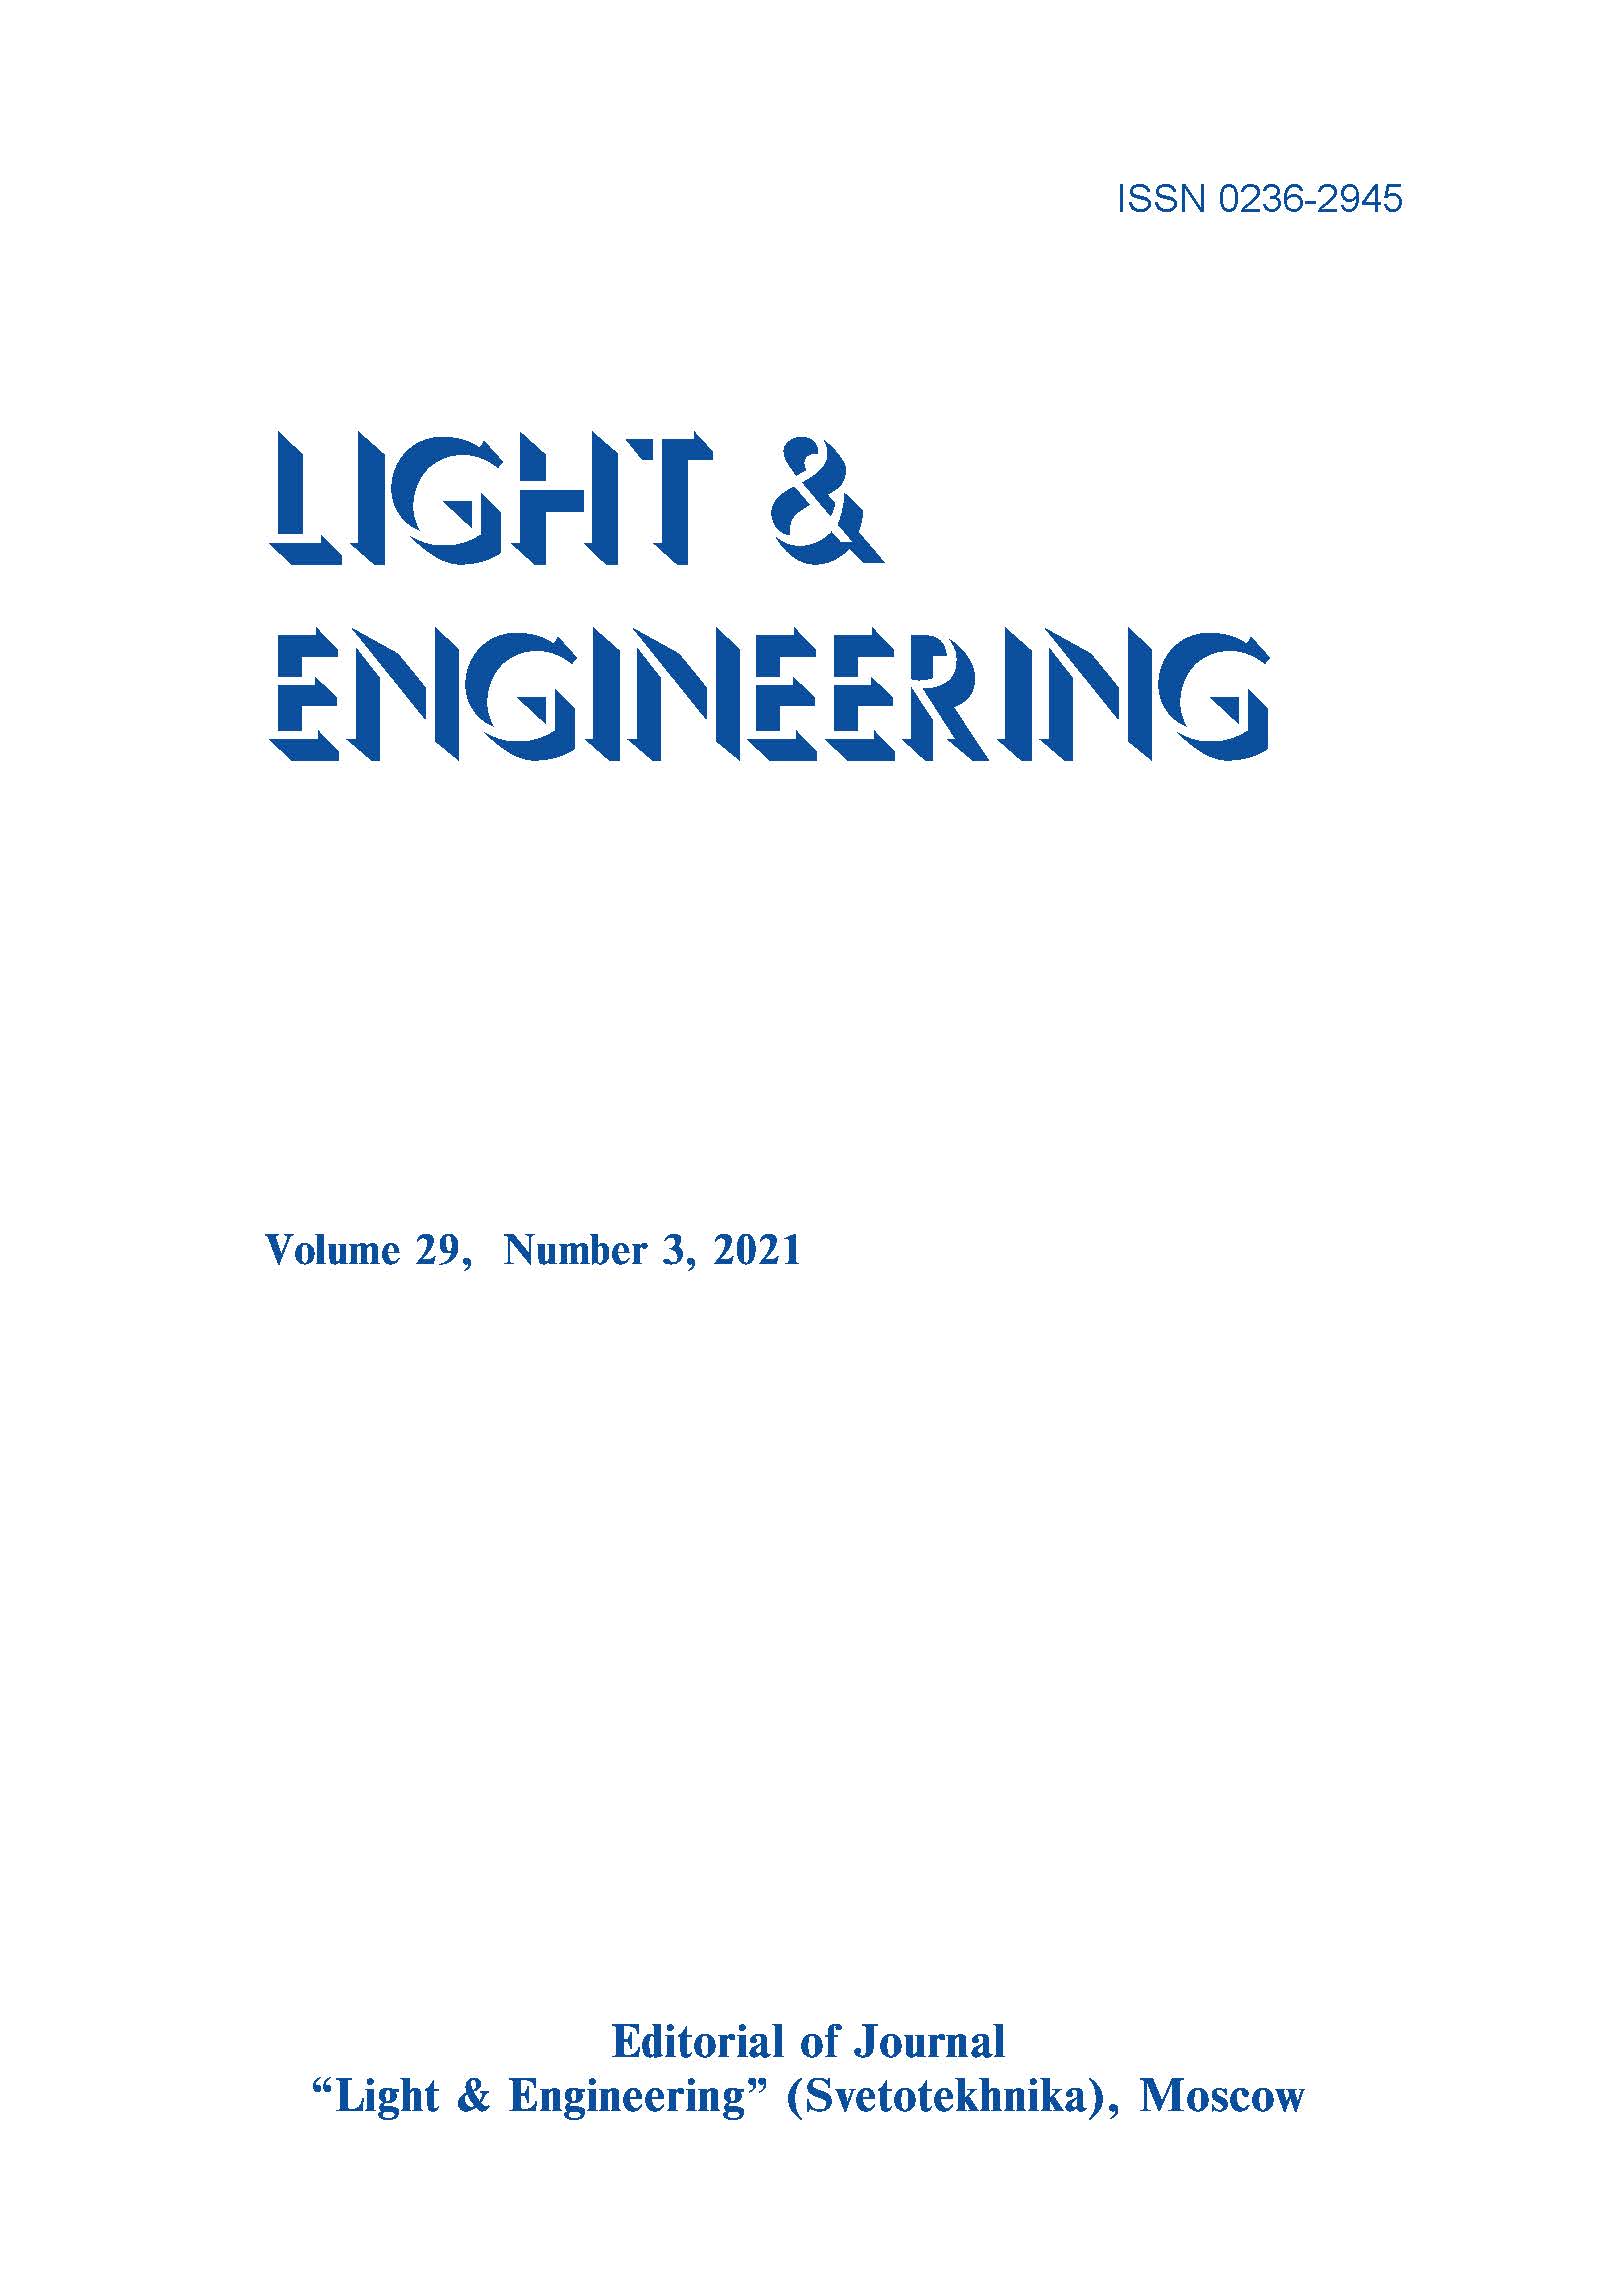 Simulation And Development Of Electronic Ballast for High Pressure Discharge Lamps L&E, Vol. 29, No. 3, 2021